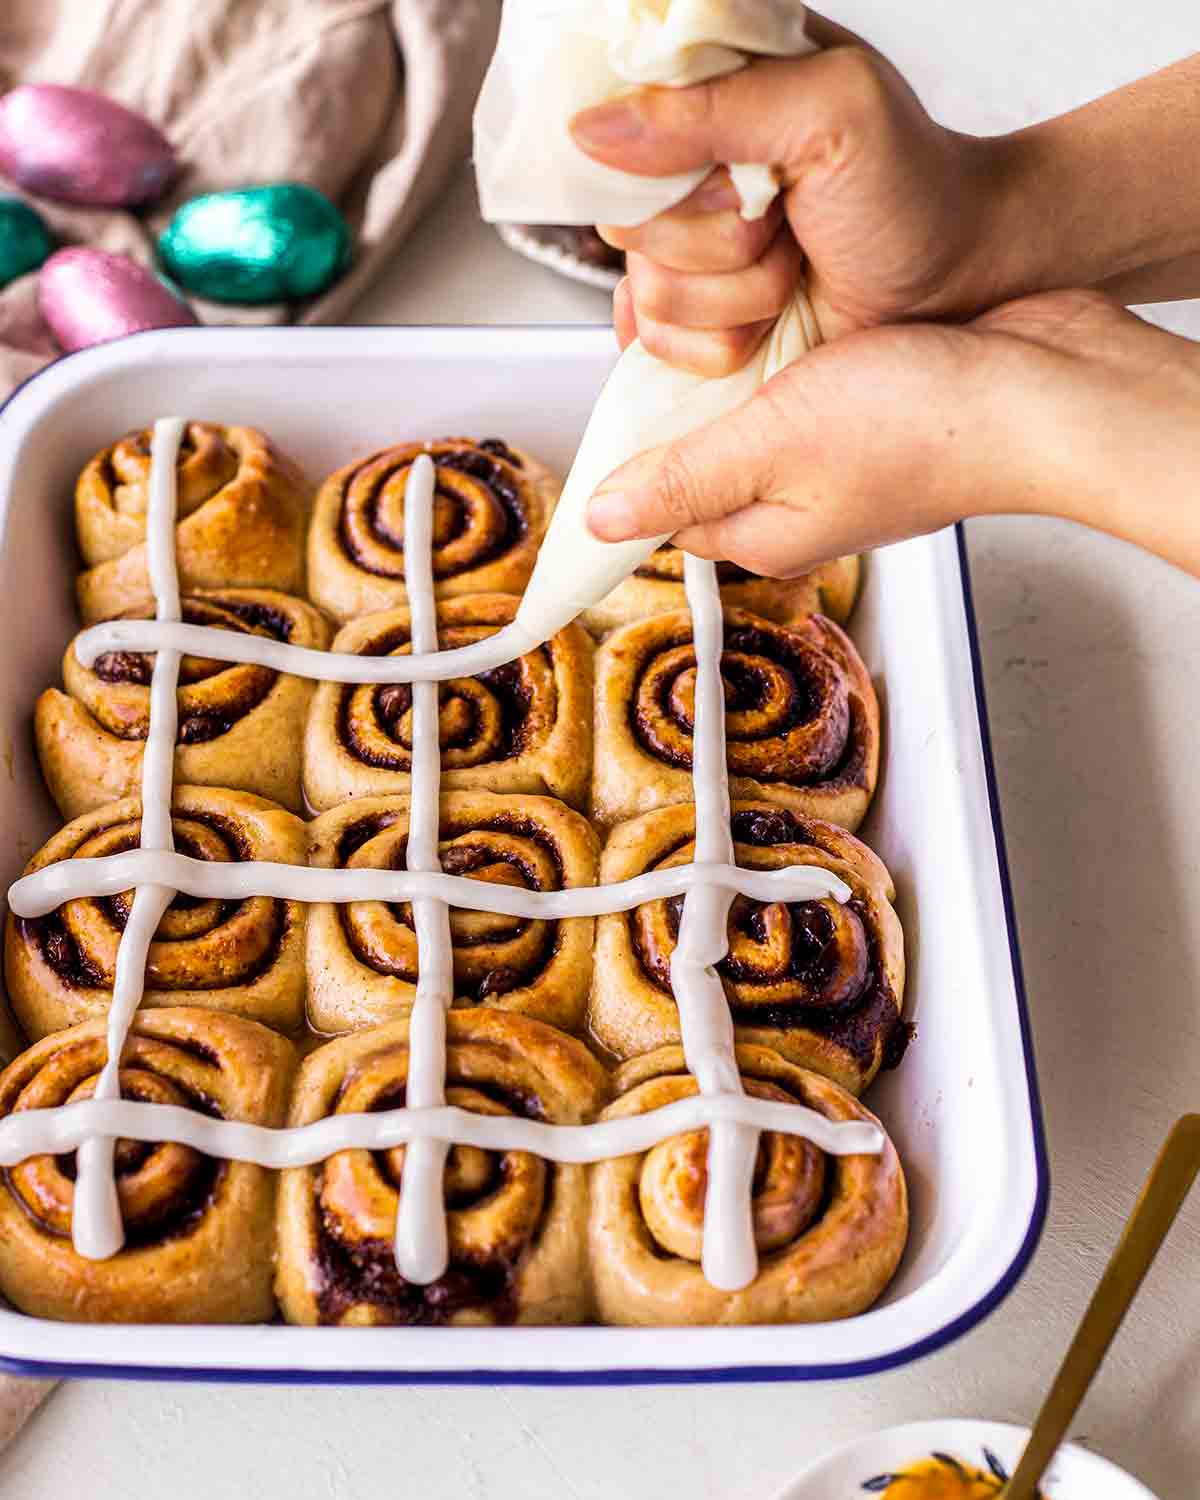 Vegan cinnamon rolls in a baking tray with two hands piping cream cheese frosting cross on the rolls.